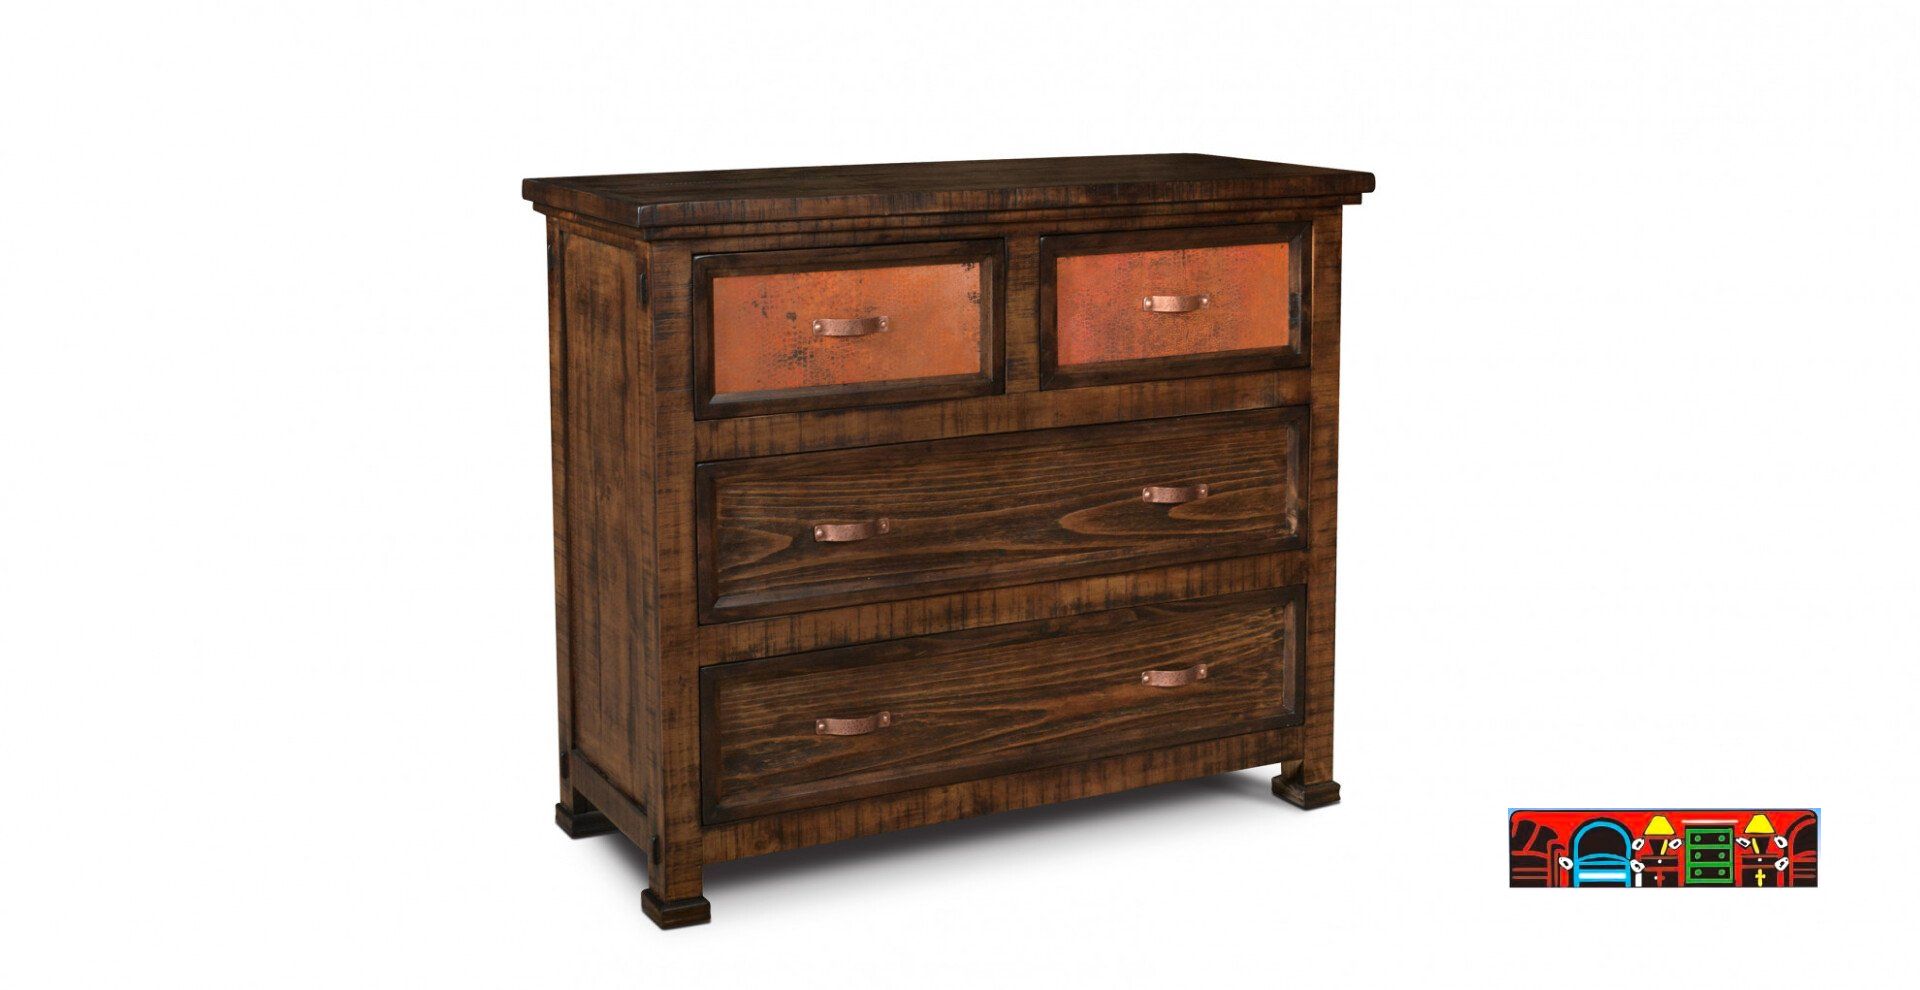 Copper Canyon four-drawer bedroom chest, crafted from solid wood in brown with copper accents.